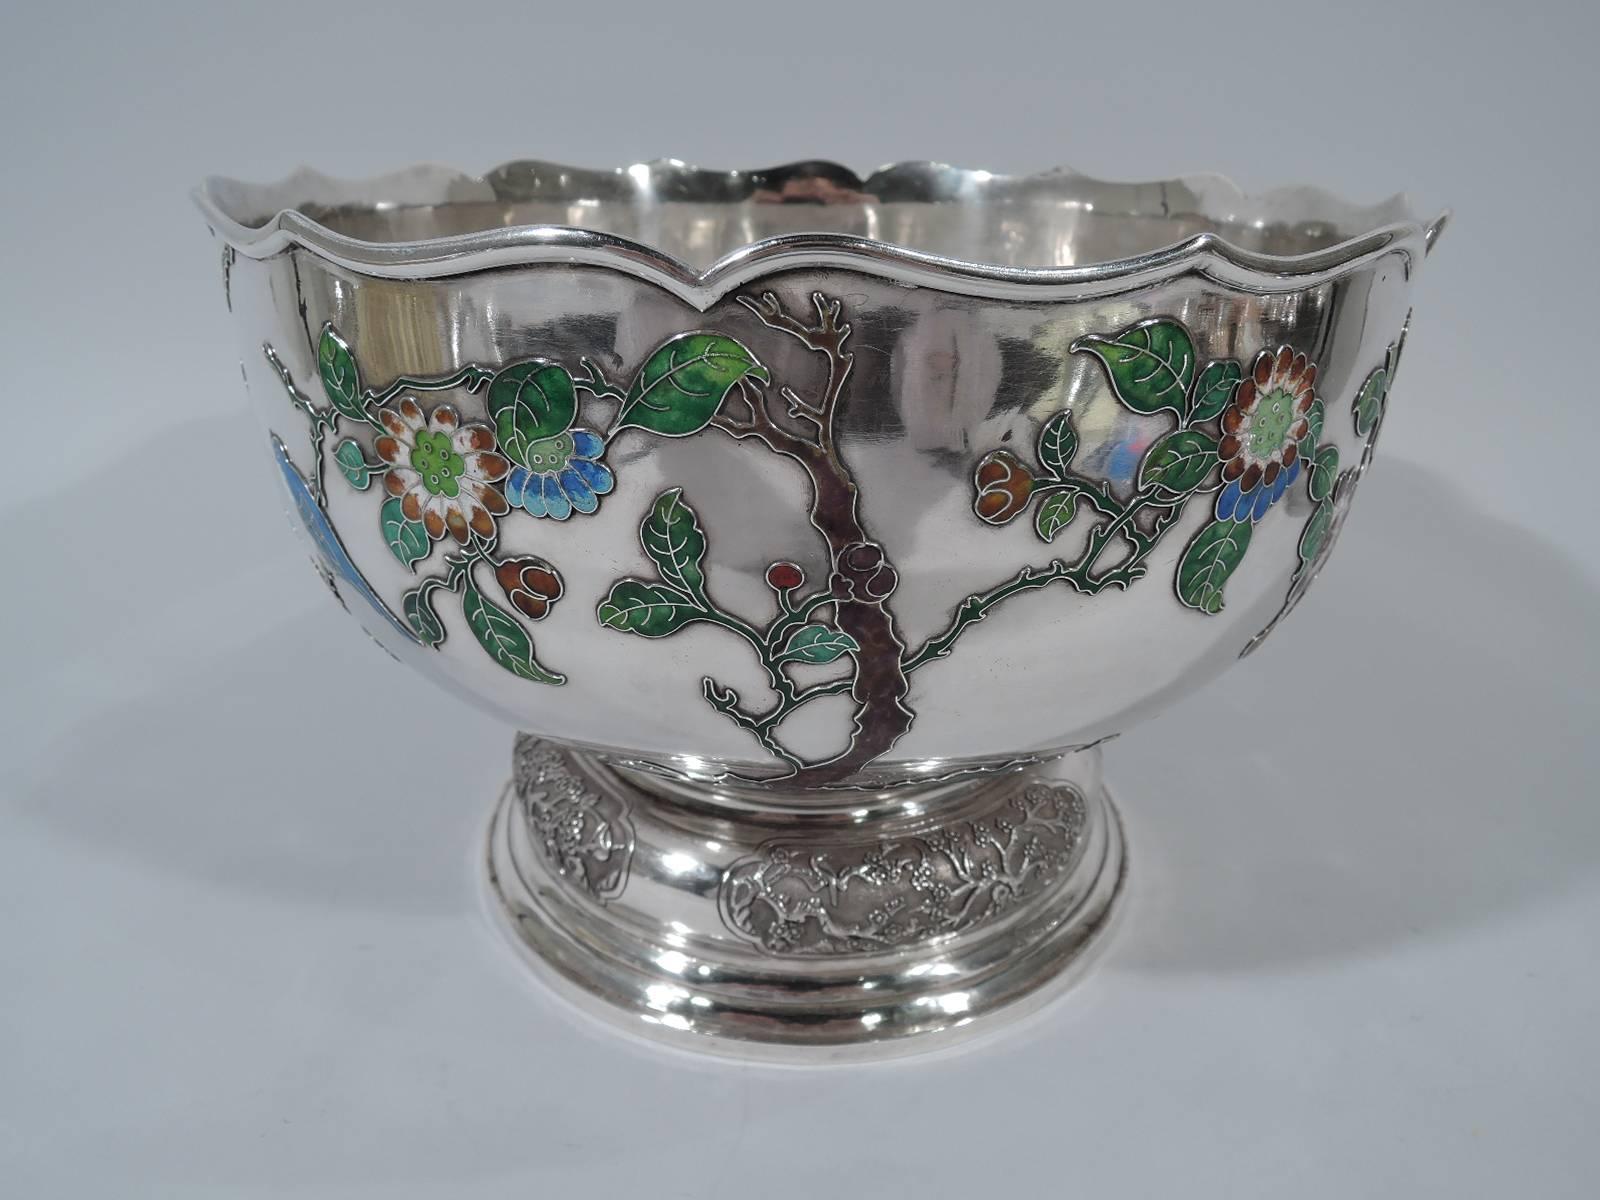 Very fine Chinese silver bowl with enamel ornament. Curved sides with molded and scrolled rim, and stepped and domed foot. Applied enamel flora and fauna, including red, purple, and blue flowers with veined green leaves and blue and white birds.